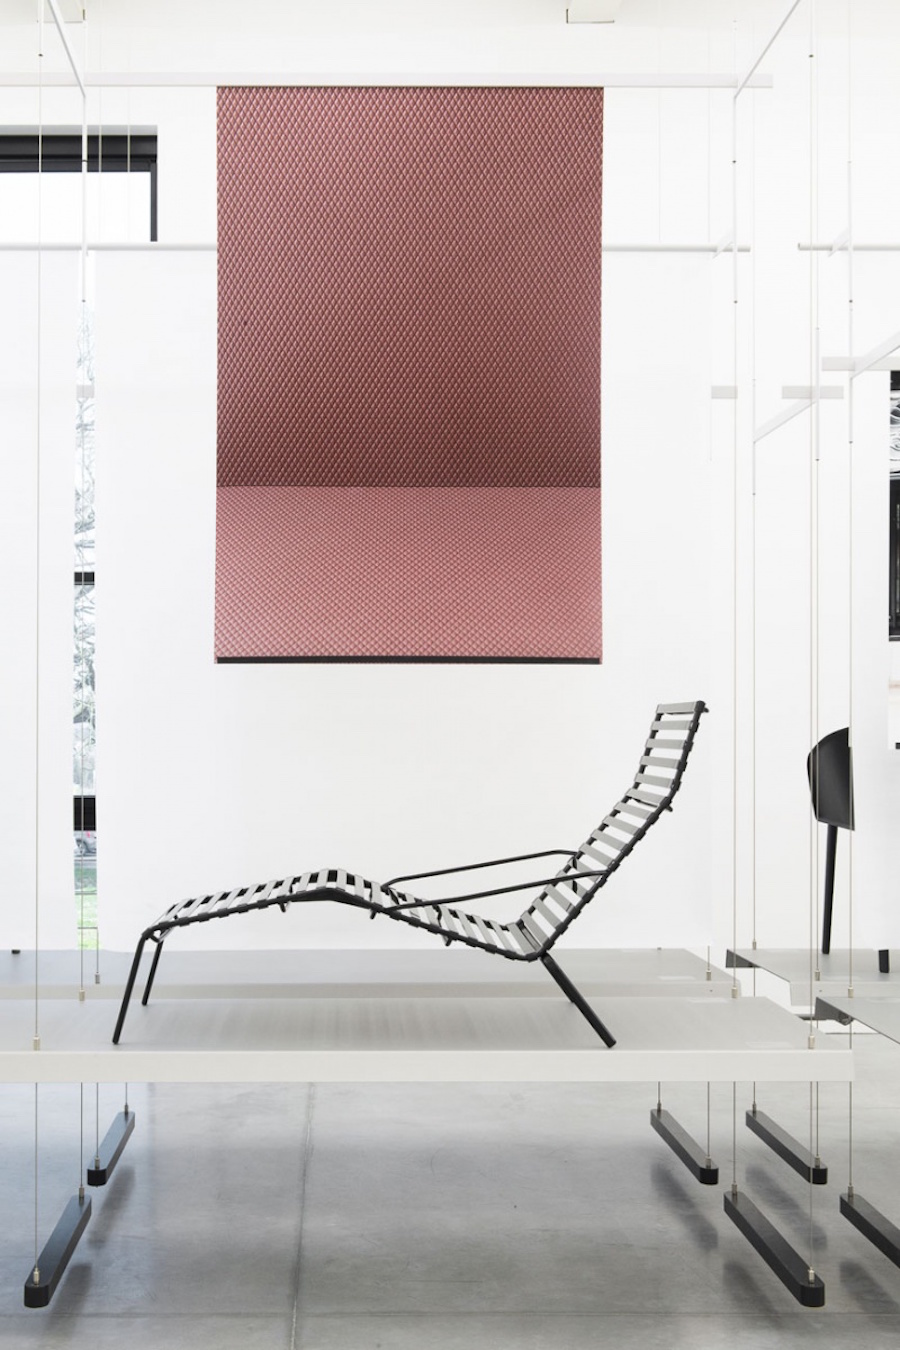 Global Retrospective of the Bouroullec Brothers' Work in Rennes9